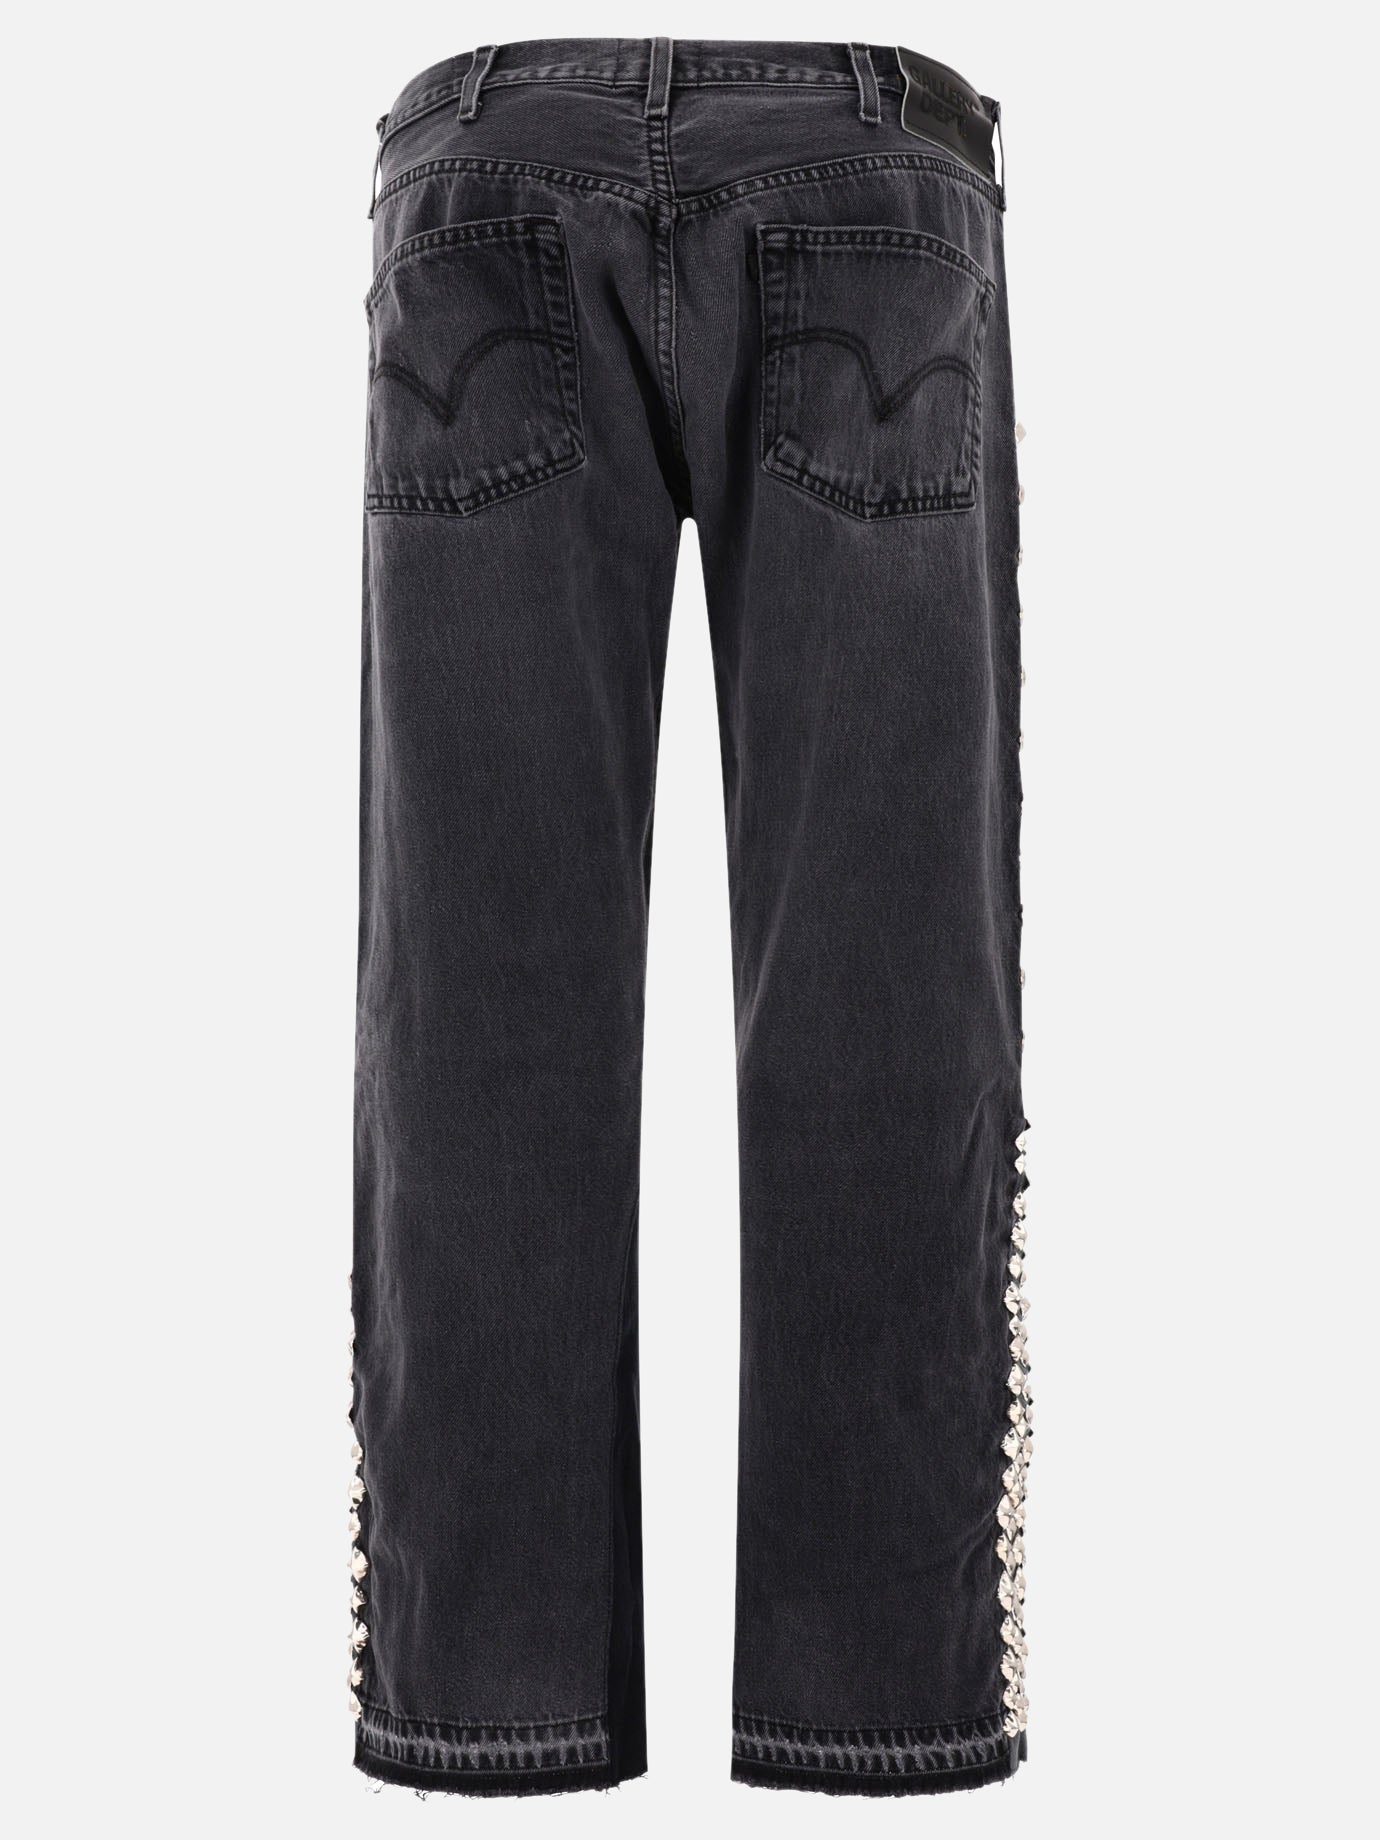 "Le Flare Studded" jeans